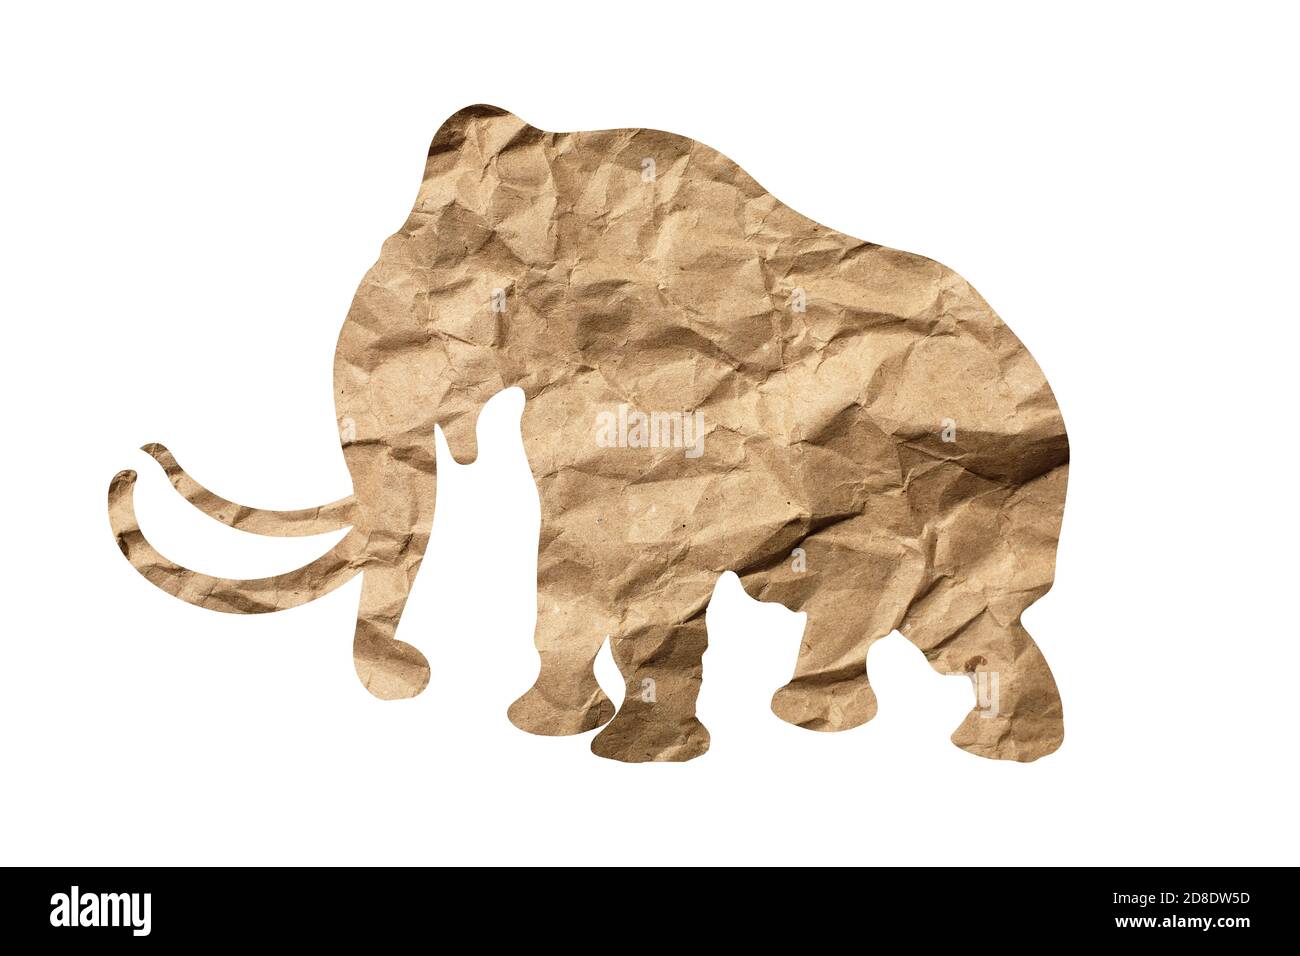 silhouette of an elephant from wrapping paper isolated on white background Stock Photo